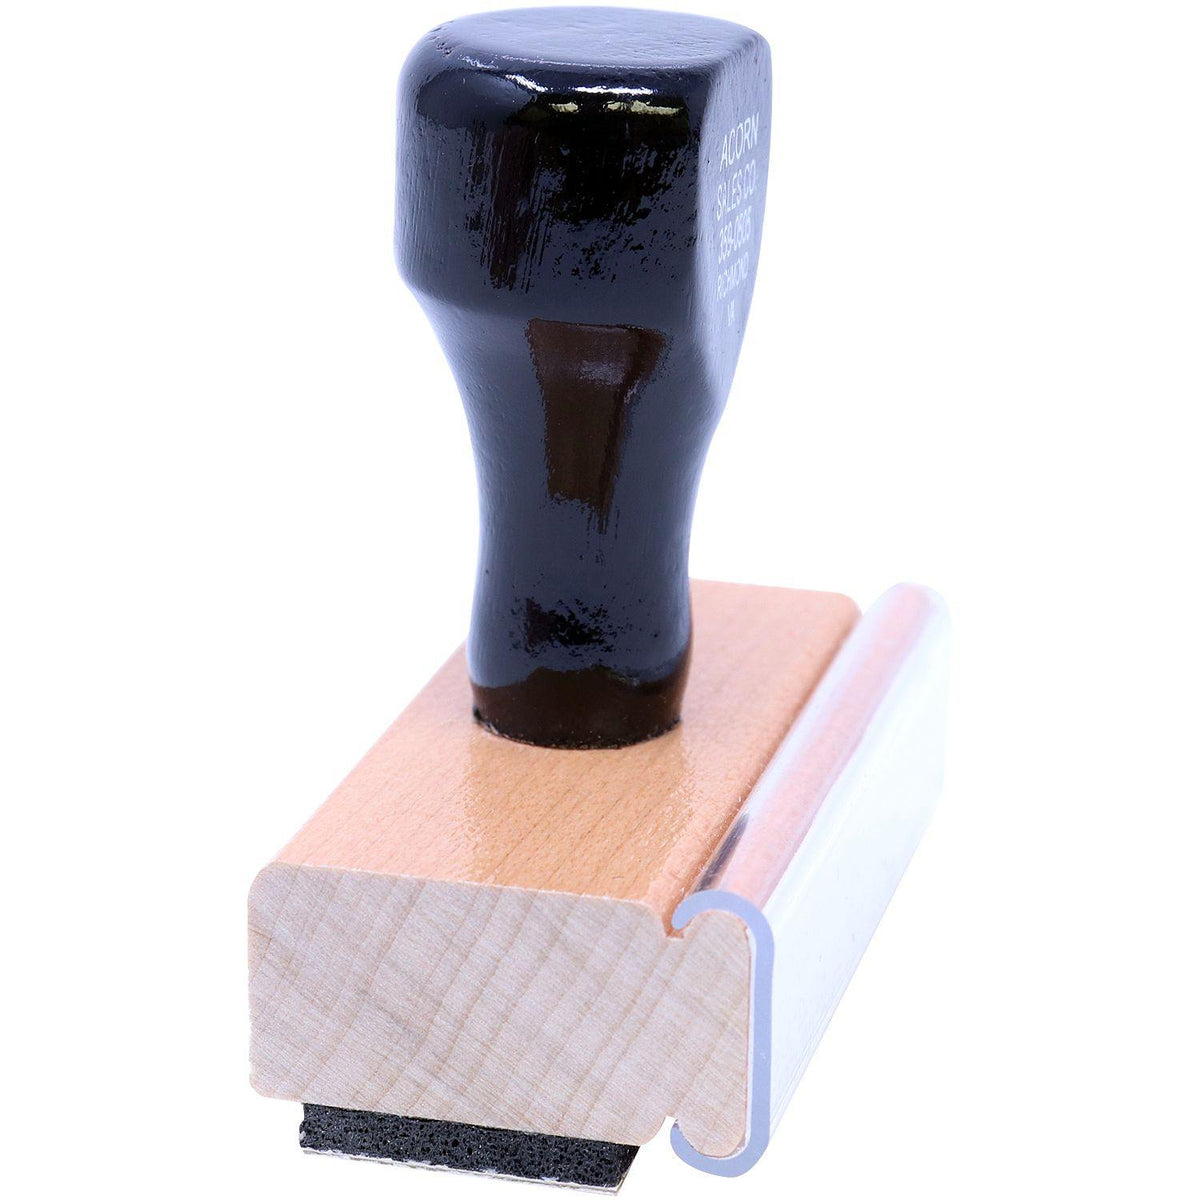 Large Unclaimed Rubber Stamp - Engineer Seal Stamps - Brand_Acorn, Impression Size_Large, Stamp Type_Regular Stamp, Type of Use_General, Type of Use_Office, Type of Use_Postal &amp; Mailing